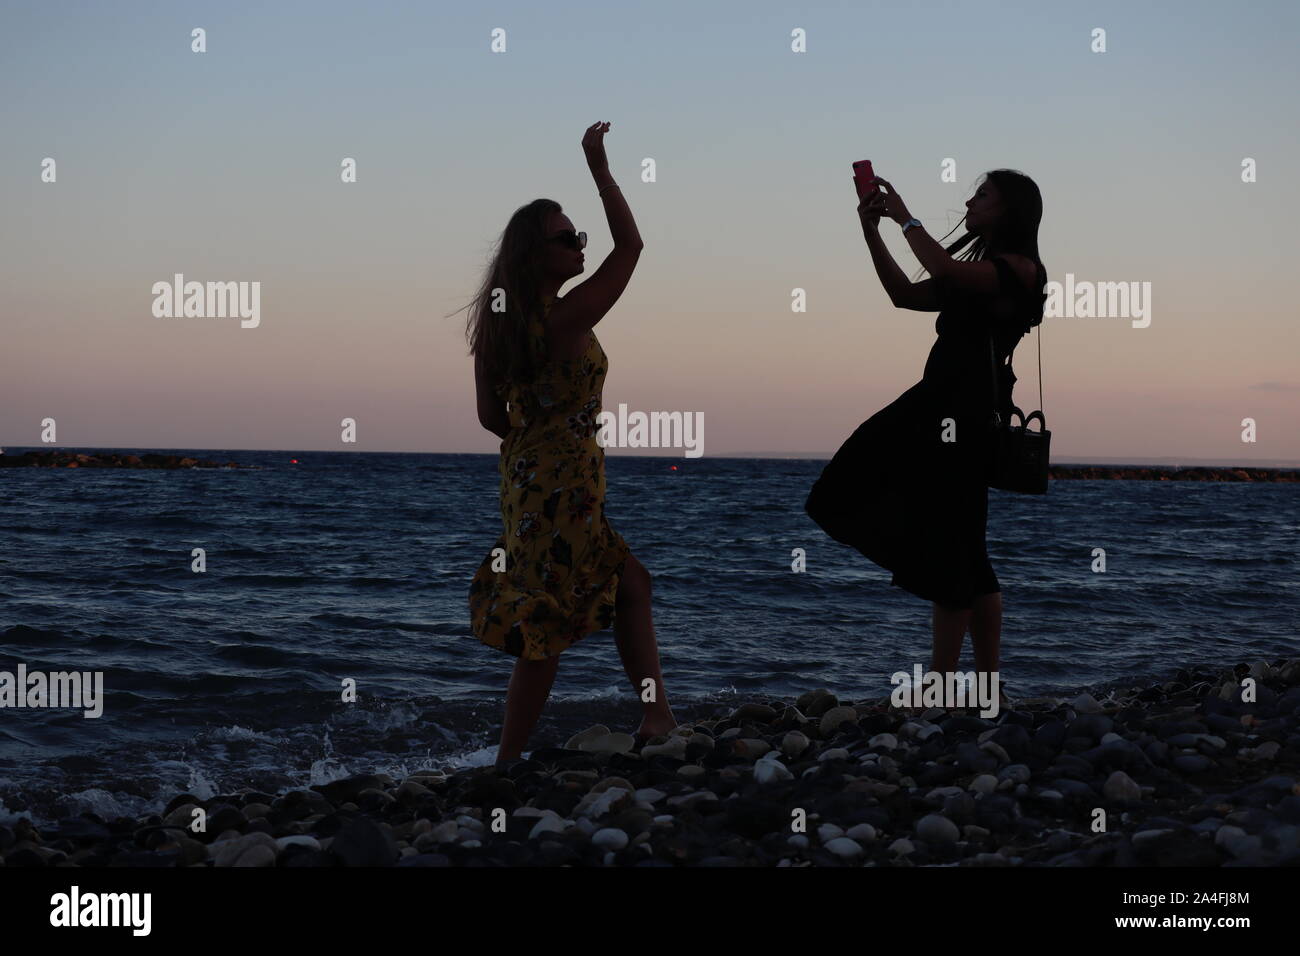 Limassol/Cyprus - August 15, 2019: Two young girls pose for pictures using smart phone camera on windy beach at sunset Stock Photo